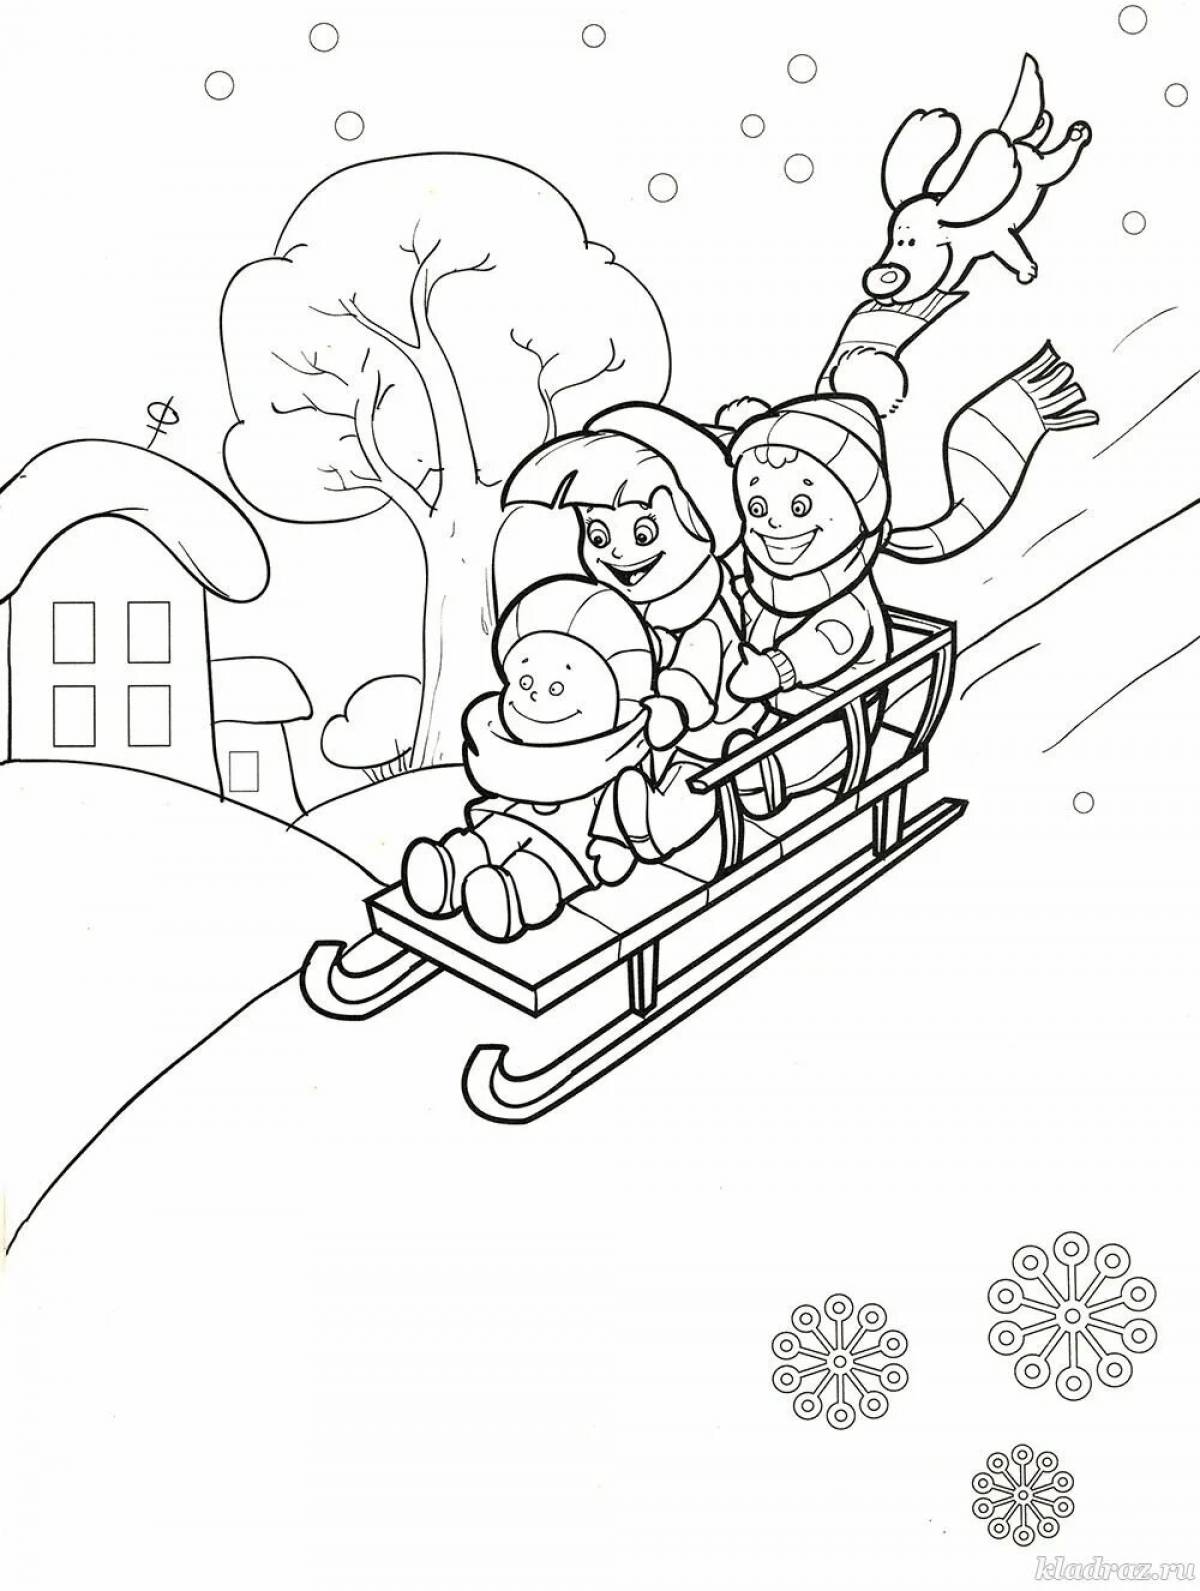 Dreamy winter slide coloring page